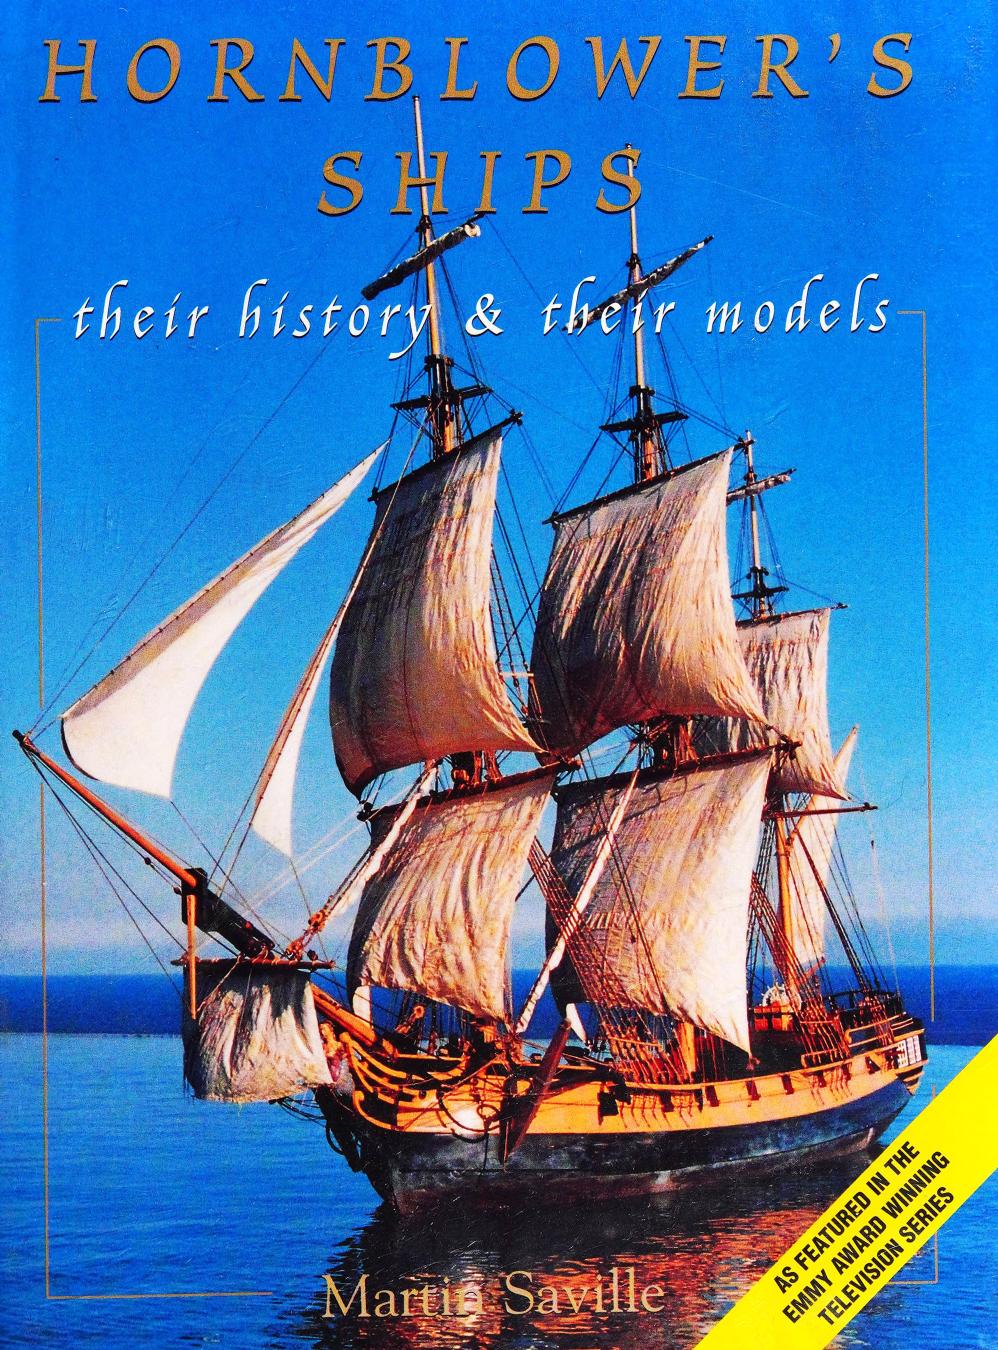 Hornblower's Ships: Their History & Their Models by Martin Saville